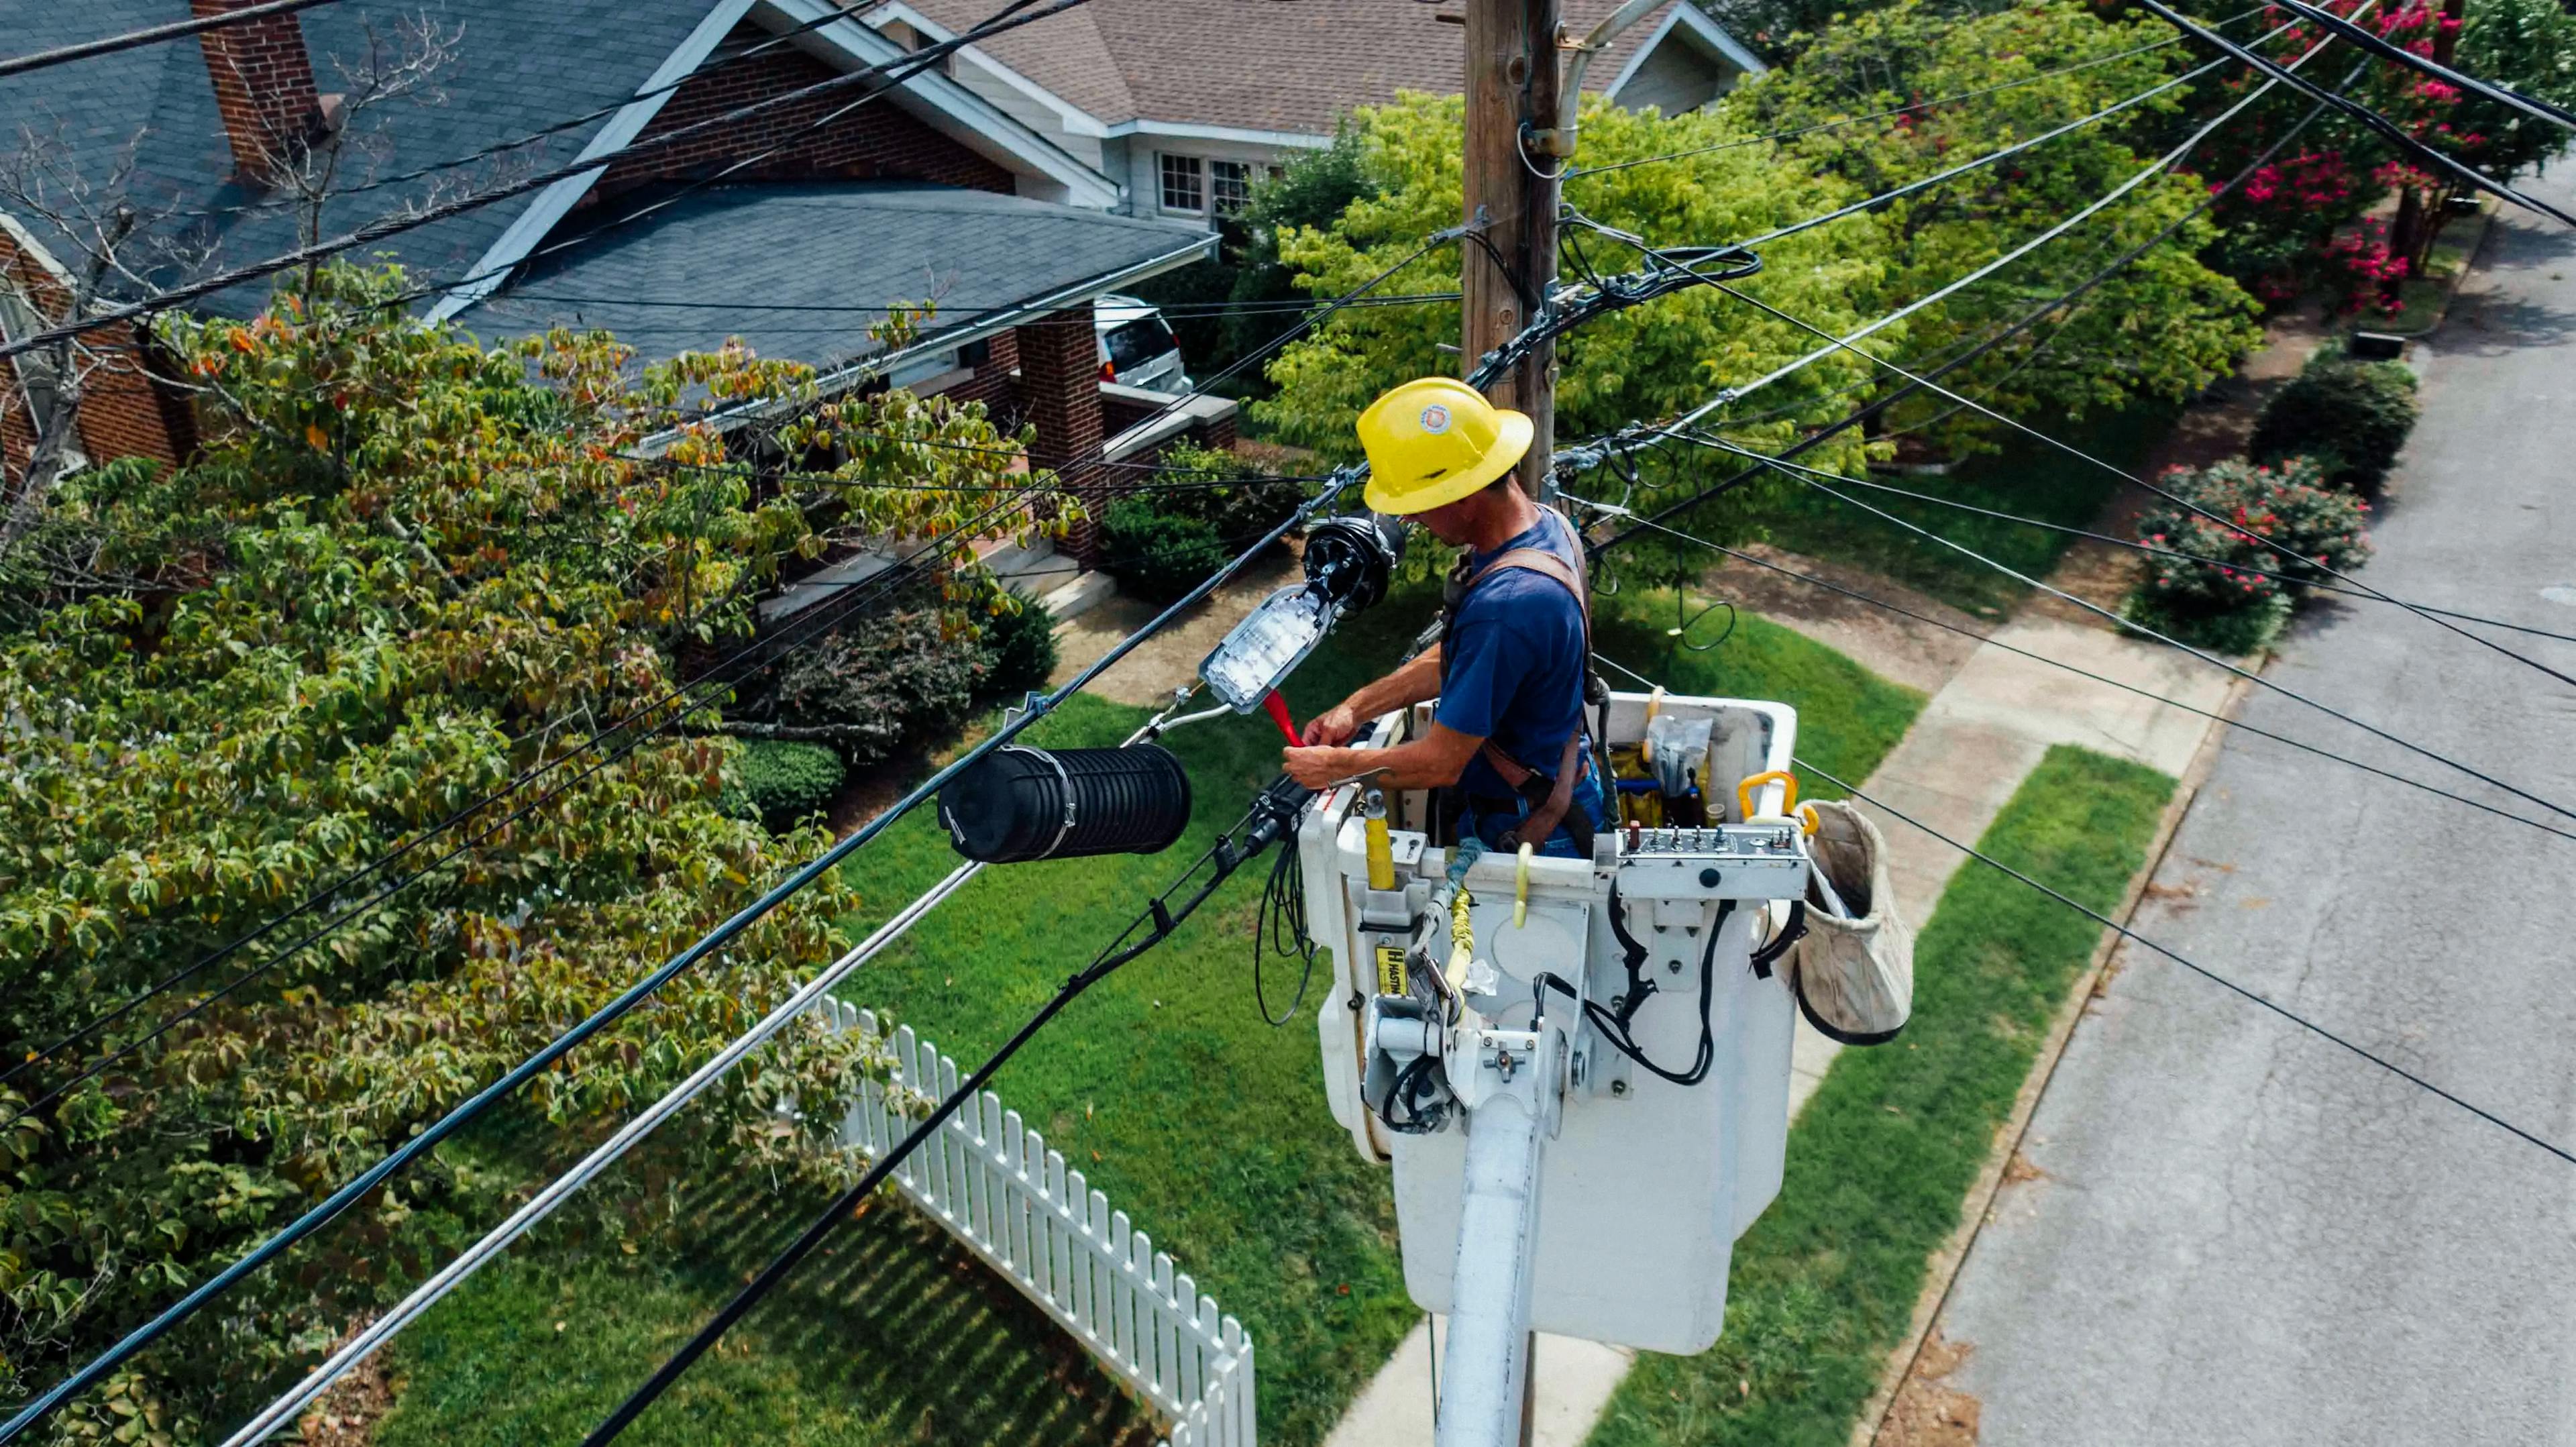 A man repairing electrical wires.